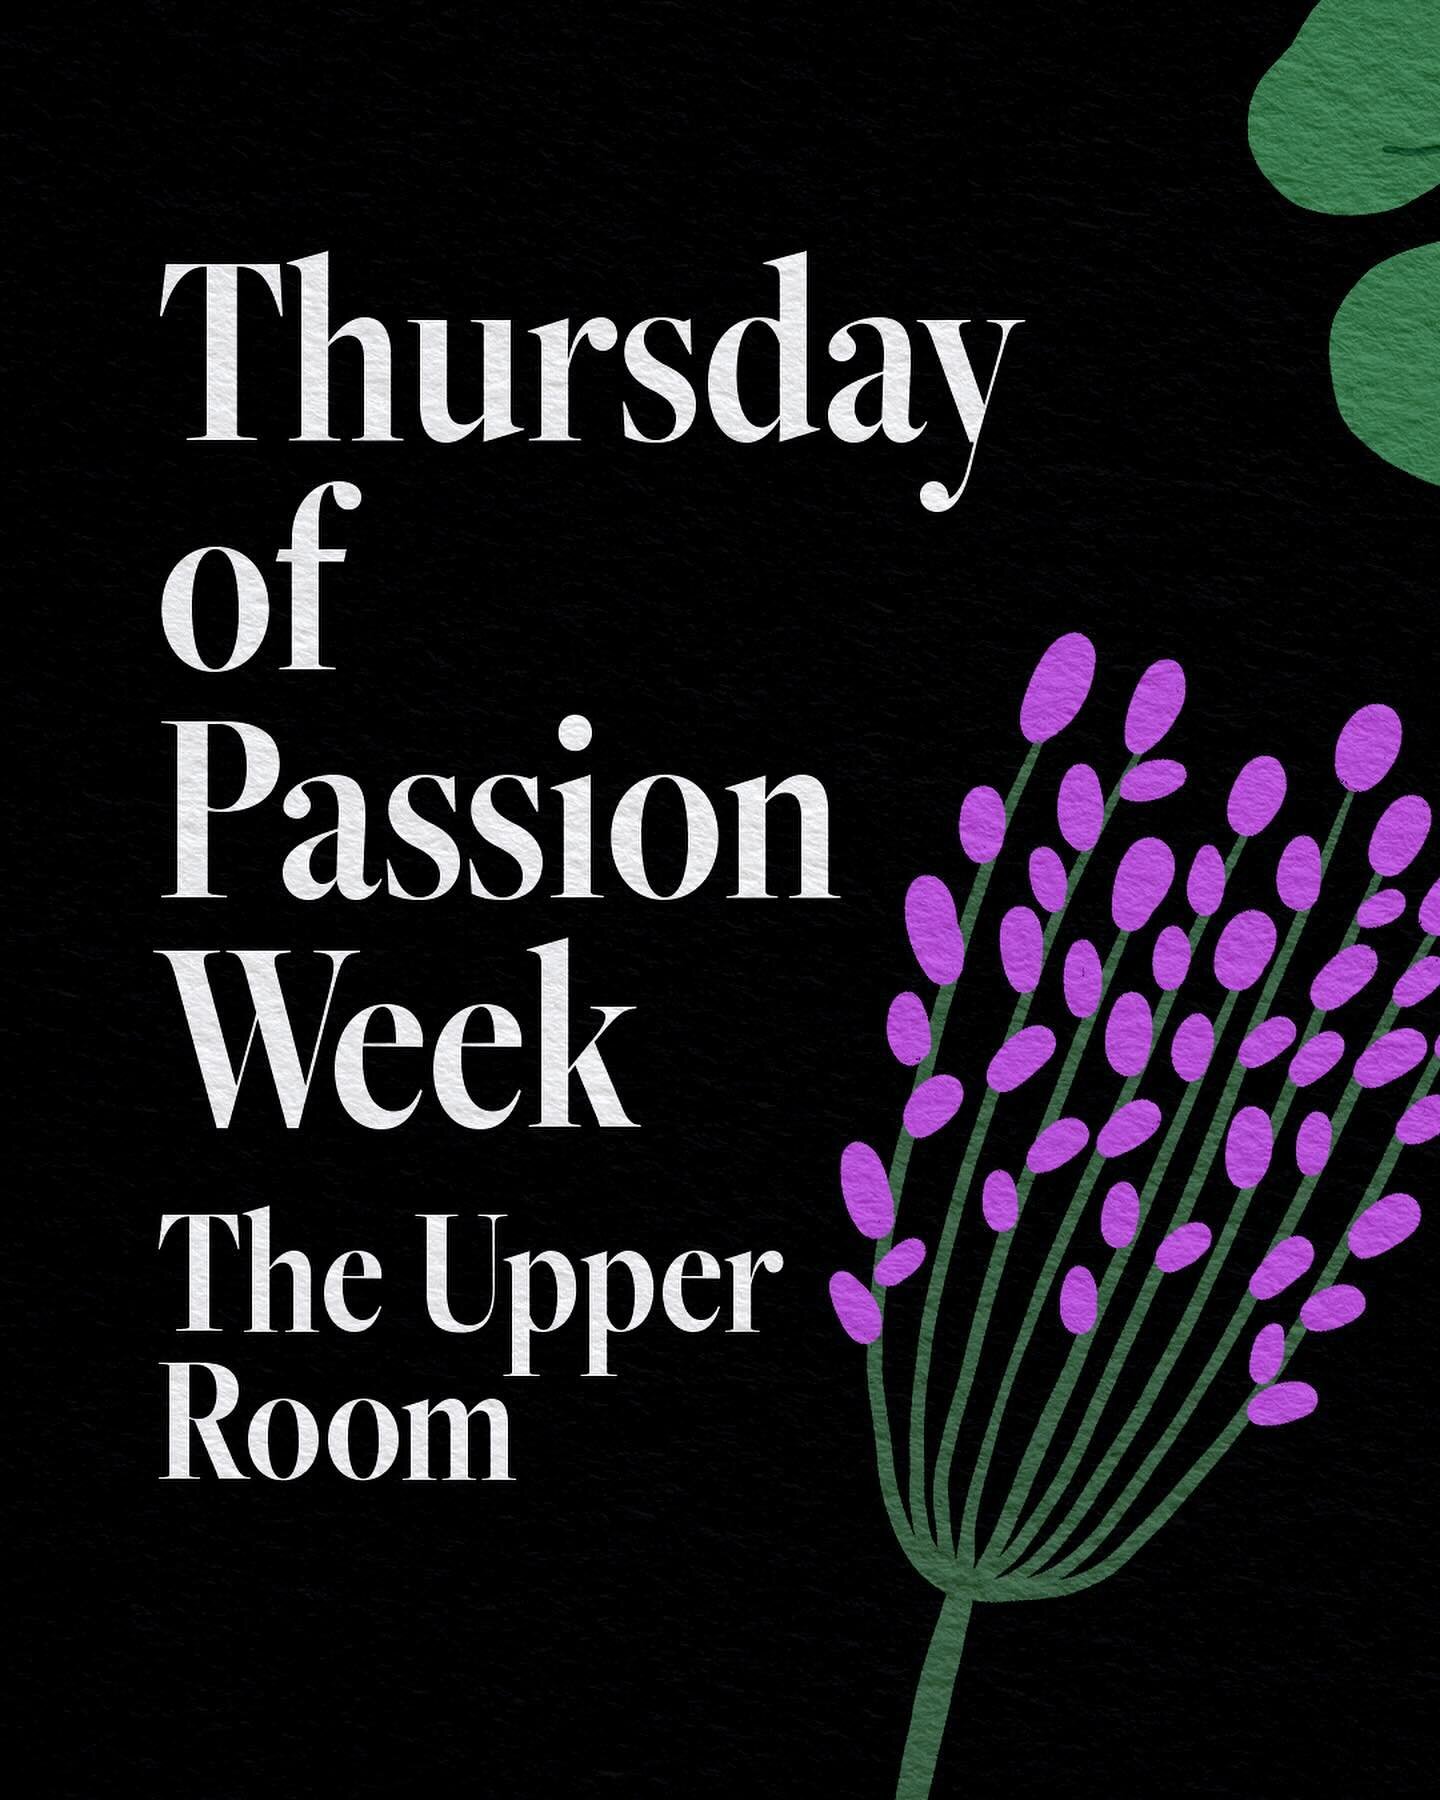 Follow along with us as we walk through Passion Week. You can download our Passions Season Companion at the link in our bio.